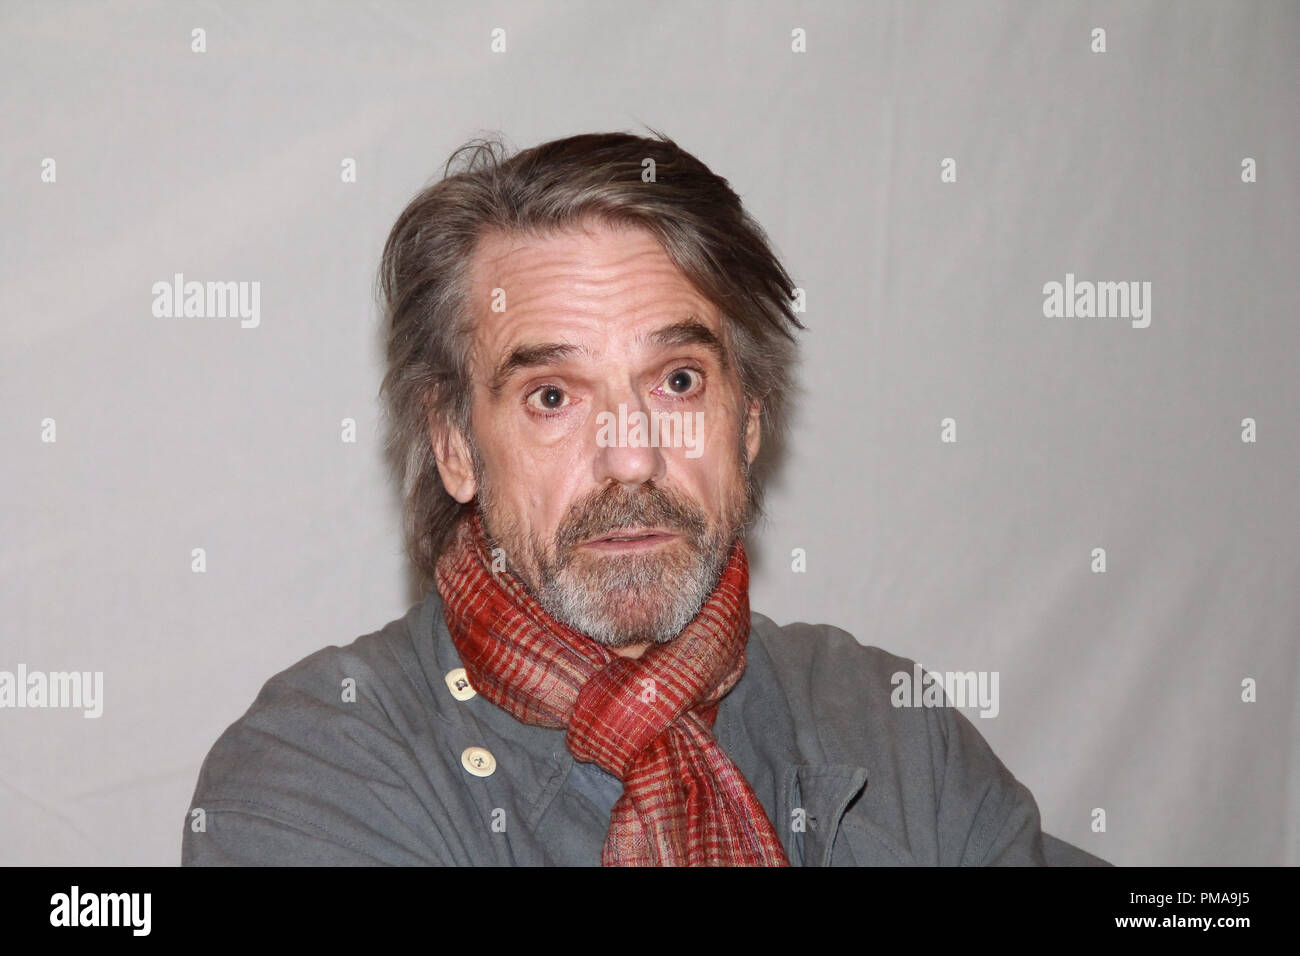 Jeremy Irons 'Borgias' Portrait Session, May 4, 2013. Reproduction by American tabloids is absolutely forbidden. File Reference # 31963 003JRC  For Editorial Use Only -  All Rights Reserved Stock Photo